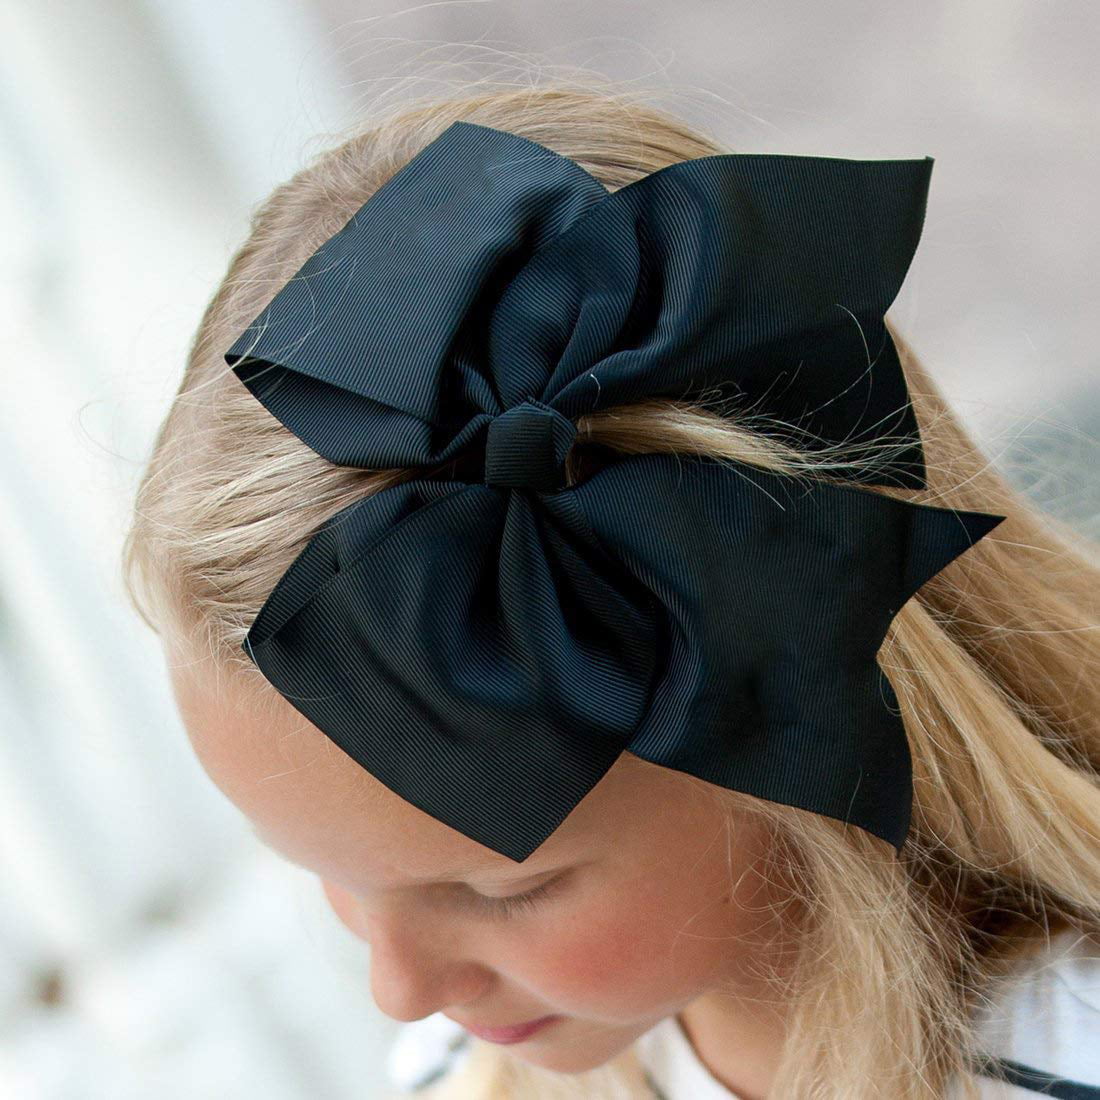 1.5 Black One Piece Double-Sided Velcro For Cheer Cuffs - 1 Foot (12 –  Cheer Bow Supply